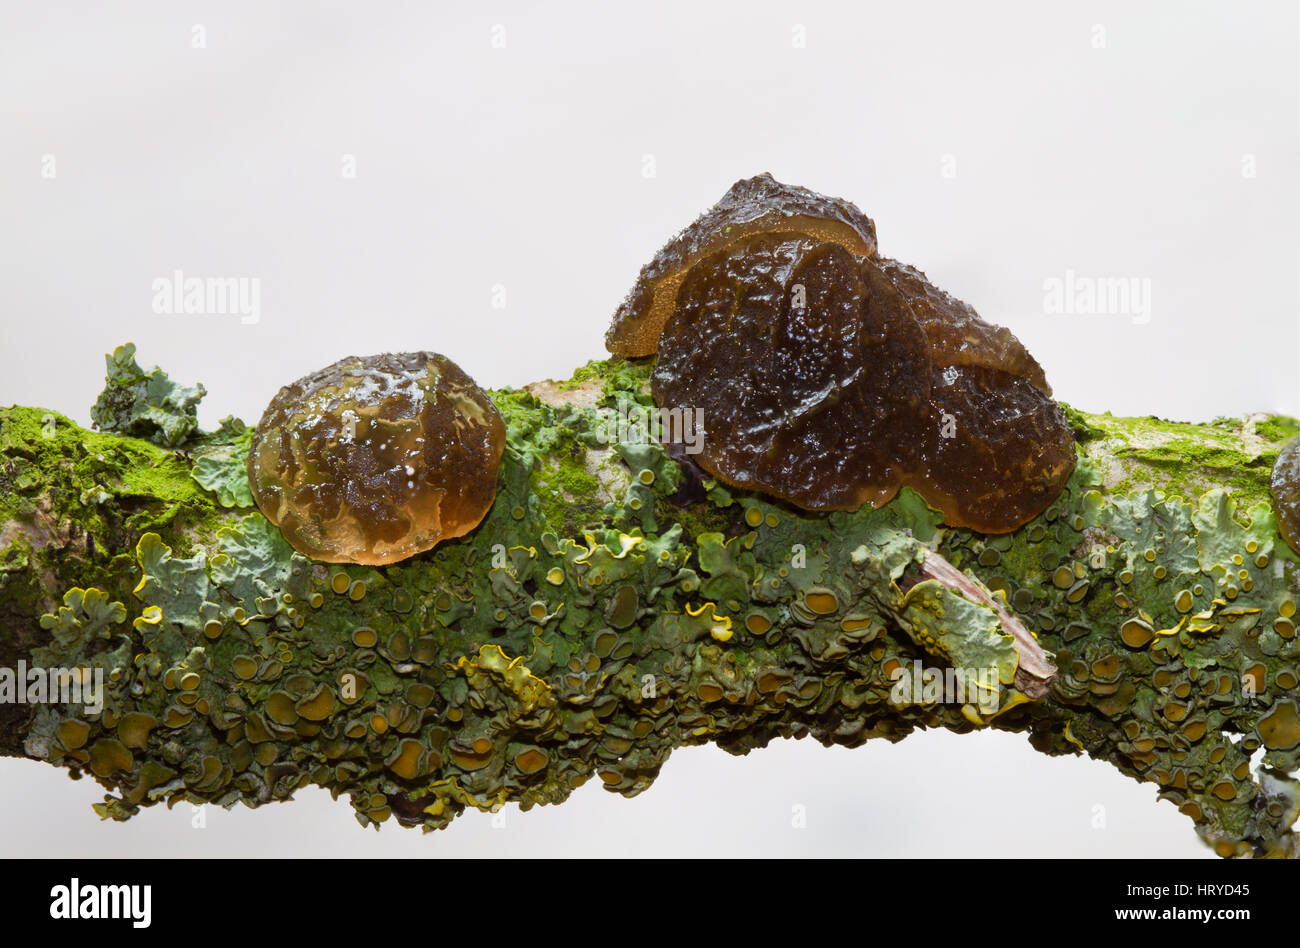 Rubbery-gelatinous, button shaped fruit bodies of Witches' butter and lichens on the rotting branch of an Oak tree. Stock Photo